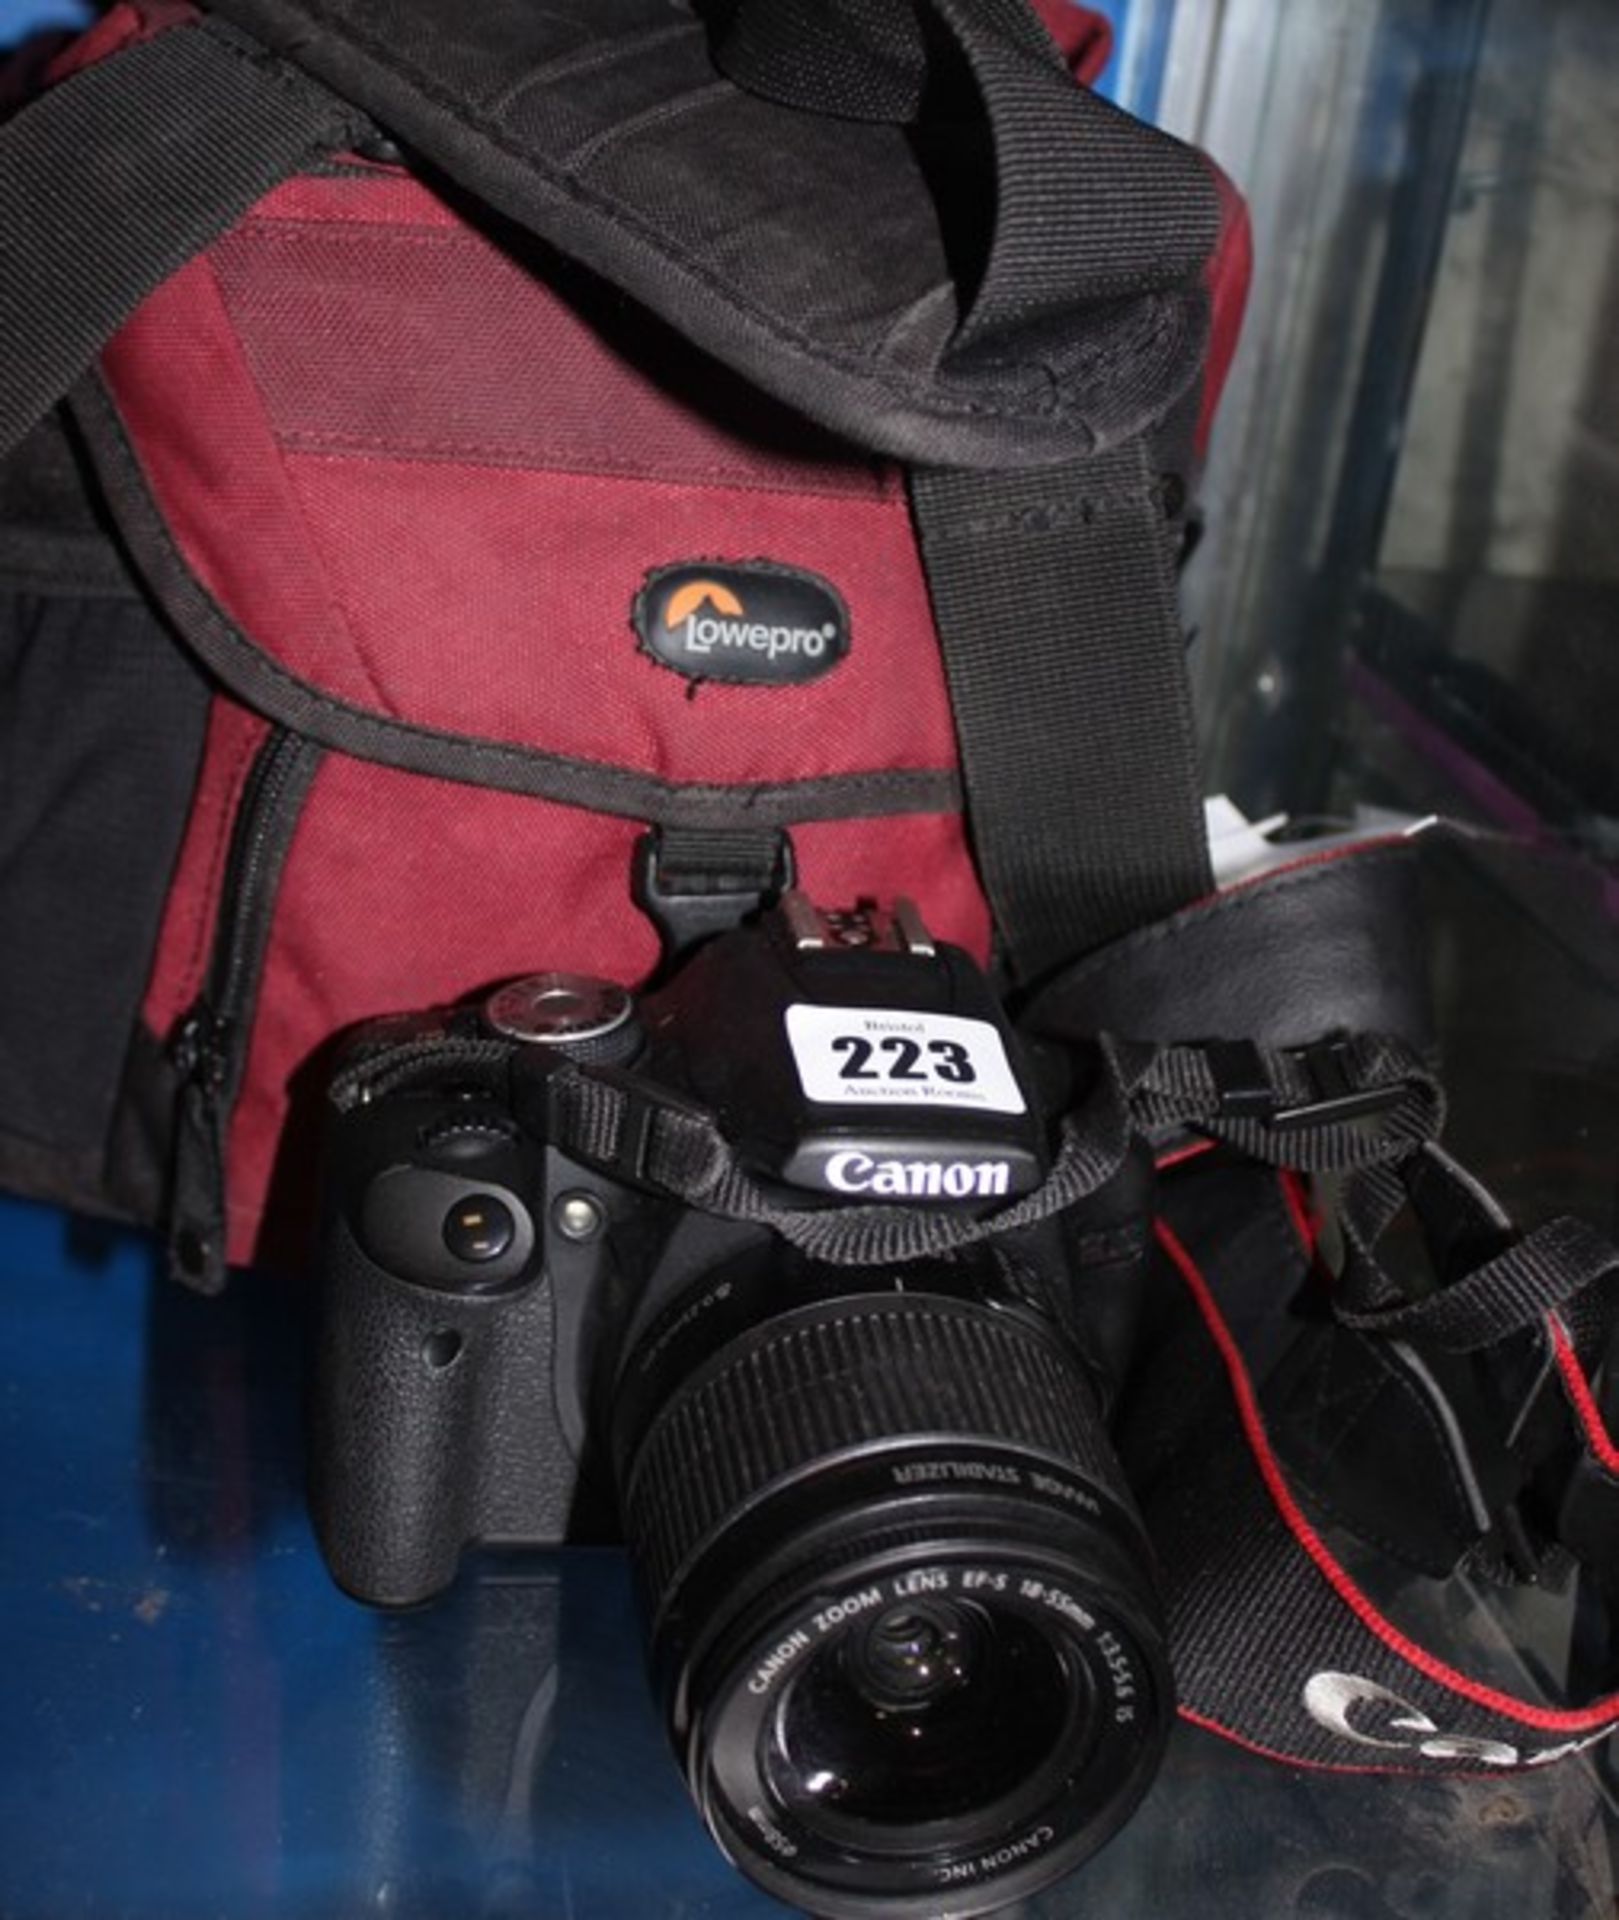 A Canon EOS Rebel T1i camera with a Canon EFS 55-250MM lens and a Canon EFS 18-55mm lens in carry